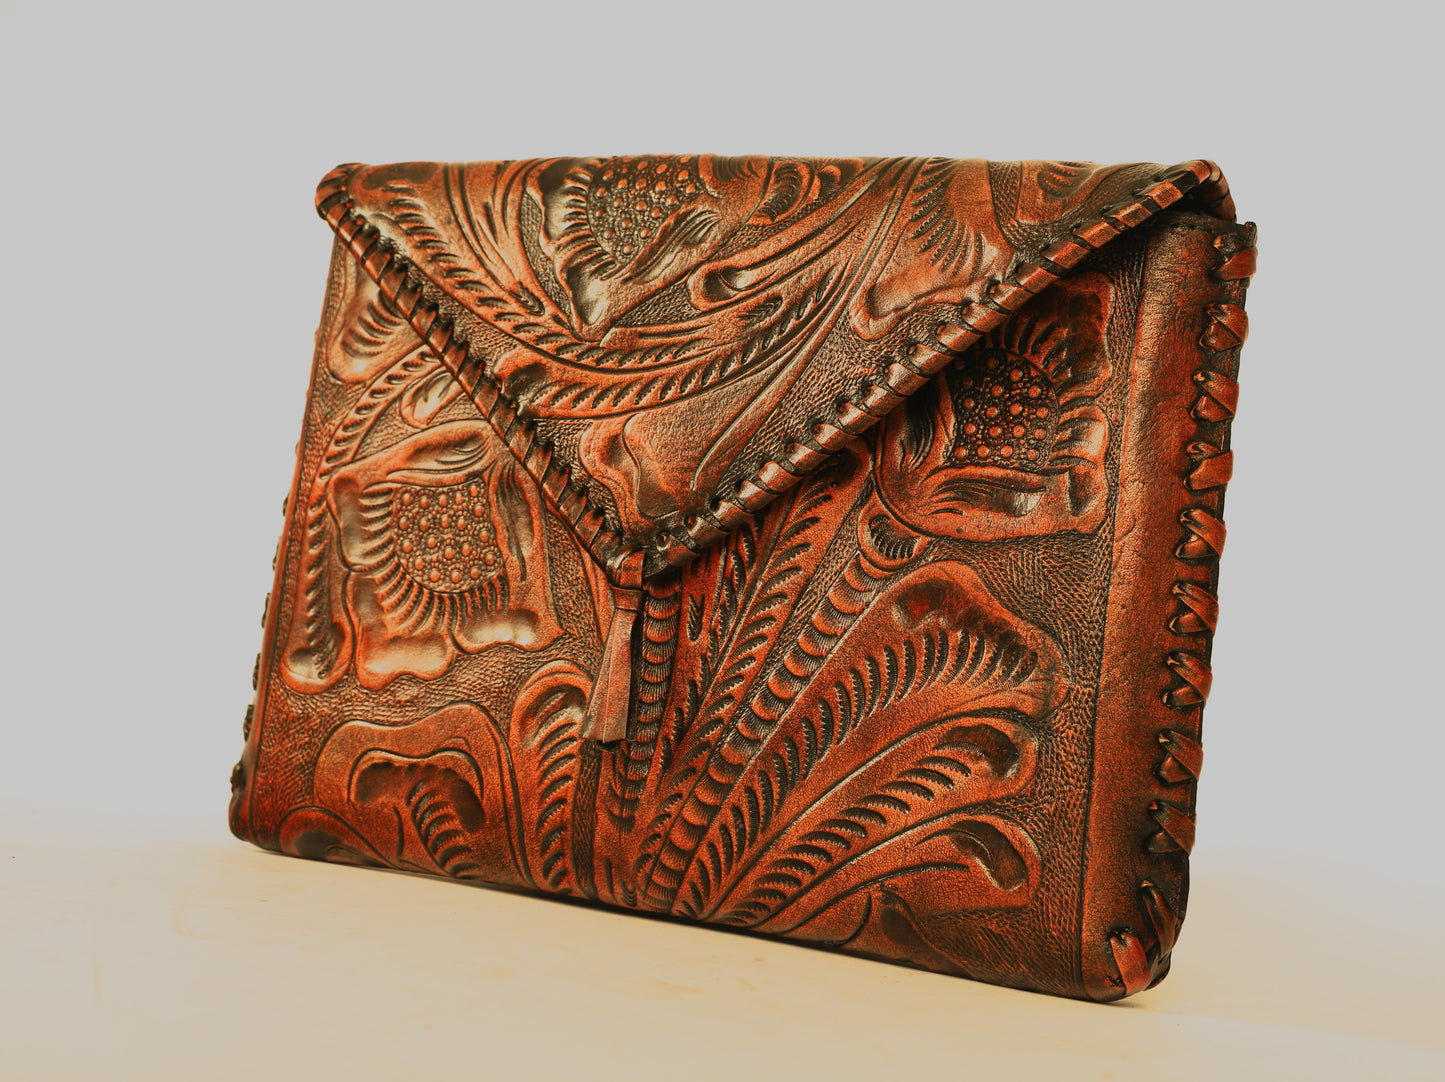 Small sized full leather crossbody bag with a triangular flap traditional mexican design on the outer flap of the purse. Fully lined with suede.  Front view of fully etched clutch. 